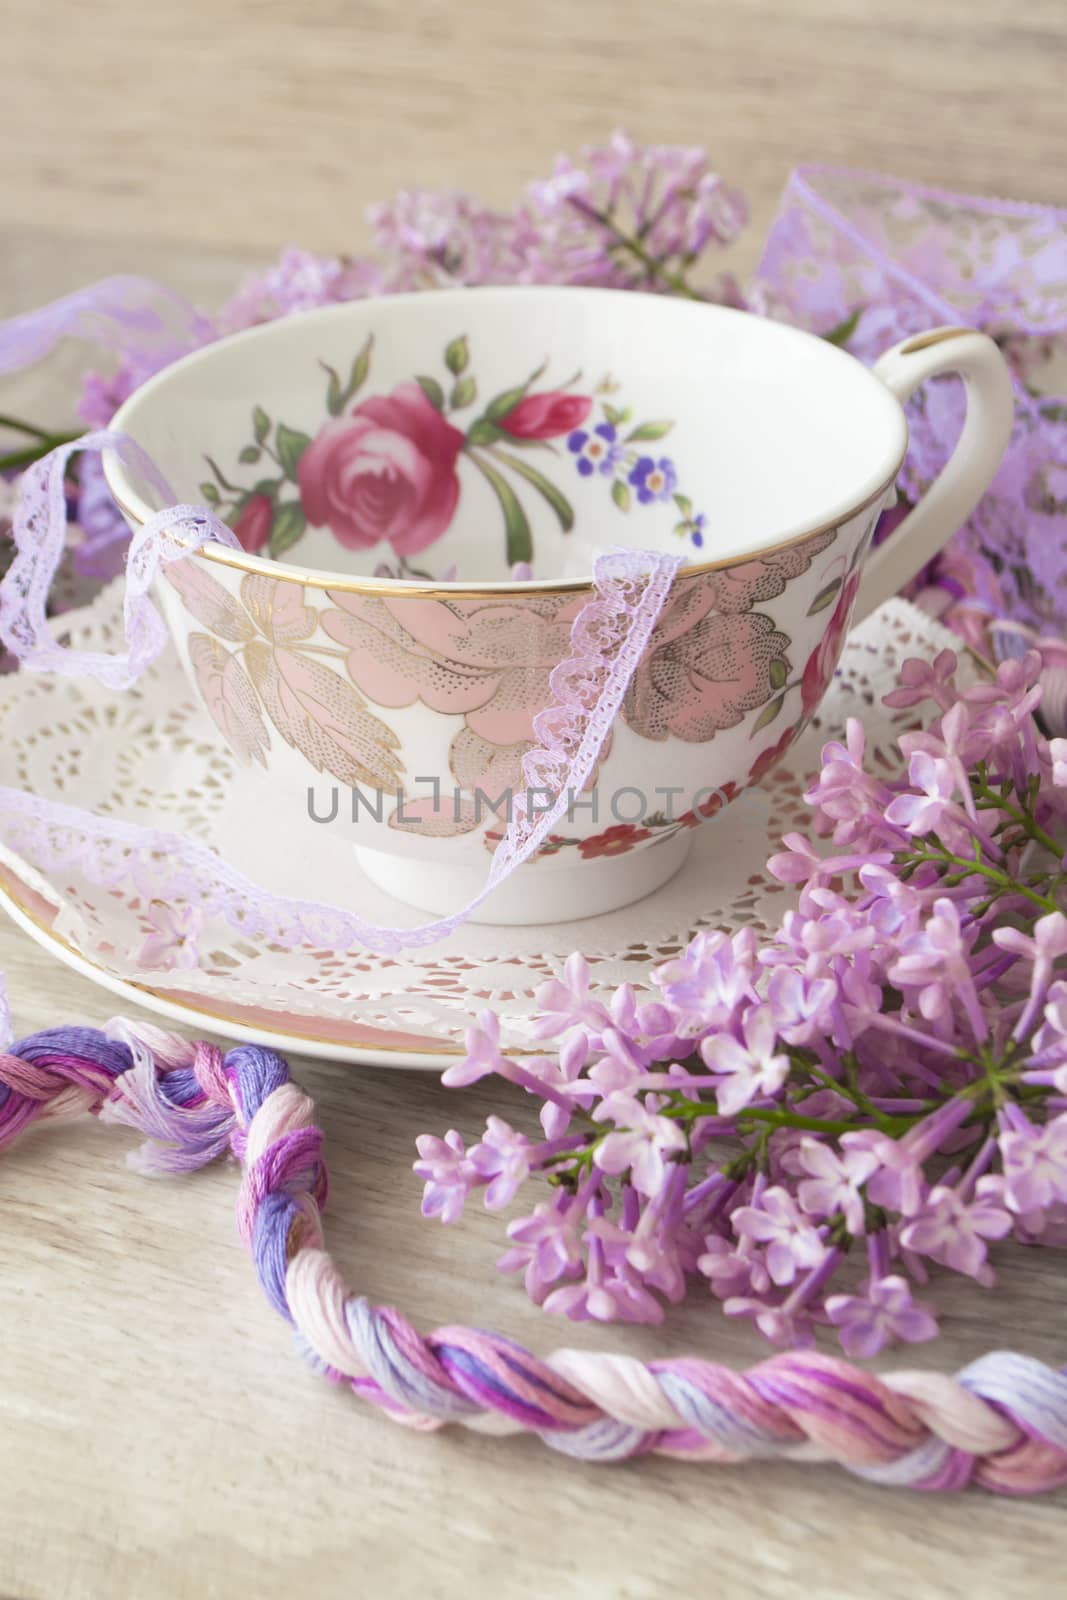 Lilac flowers with vintage cup, violet and purple colors, vertical image